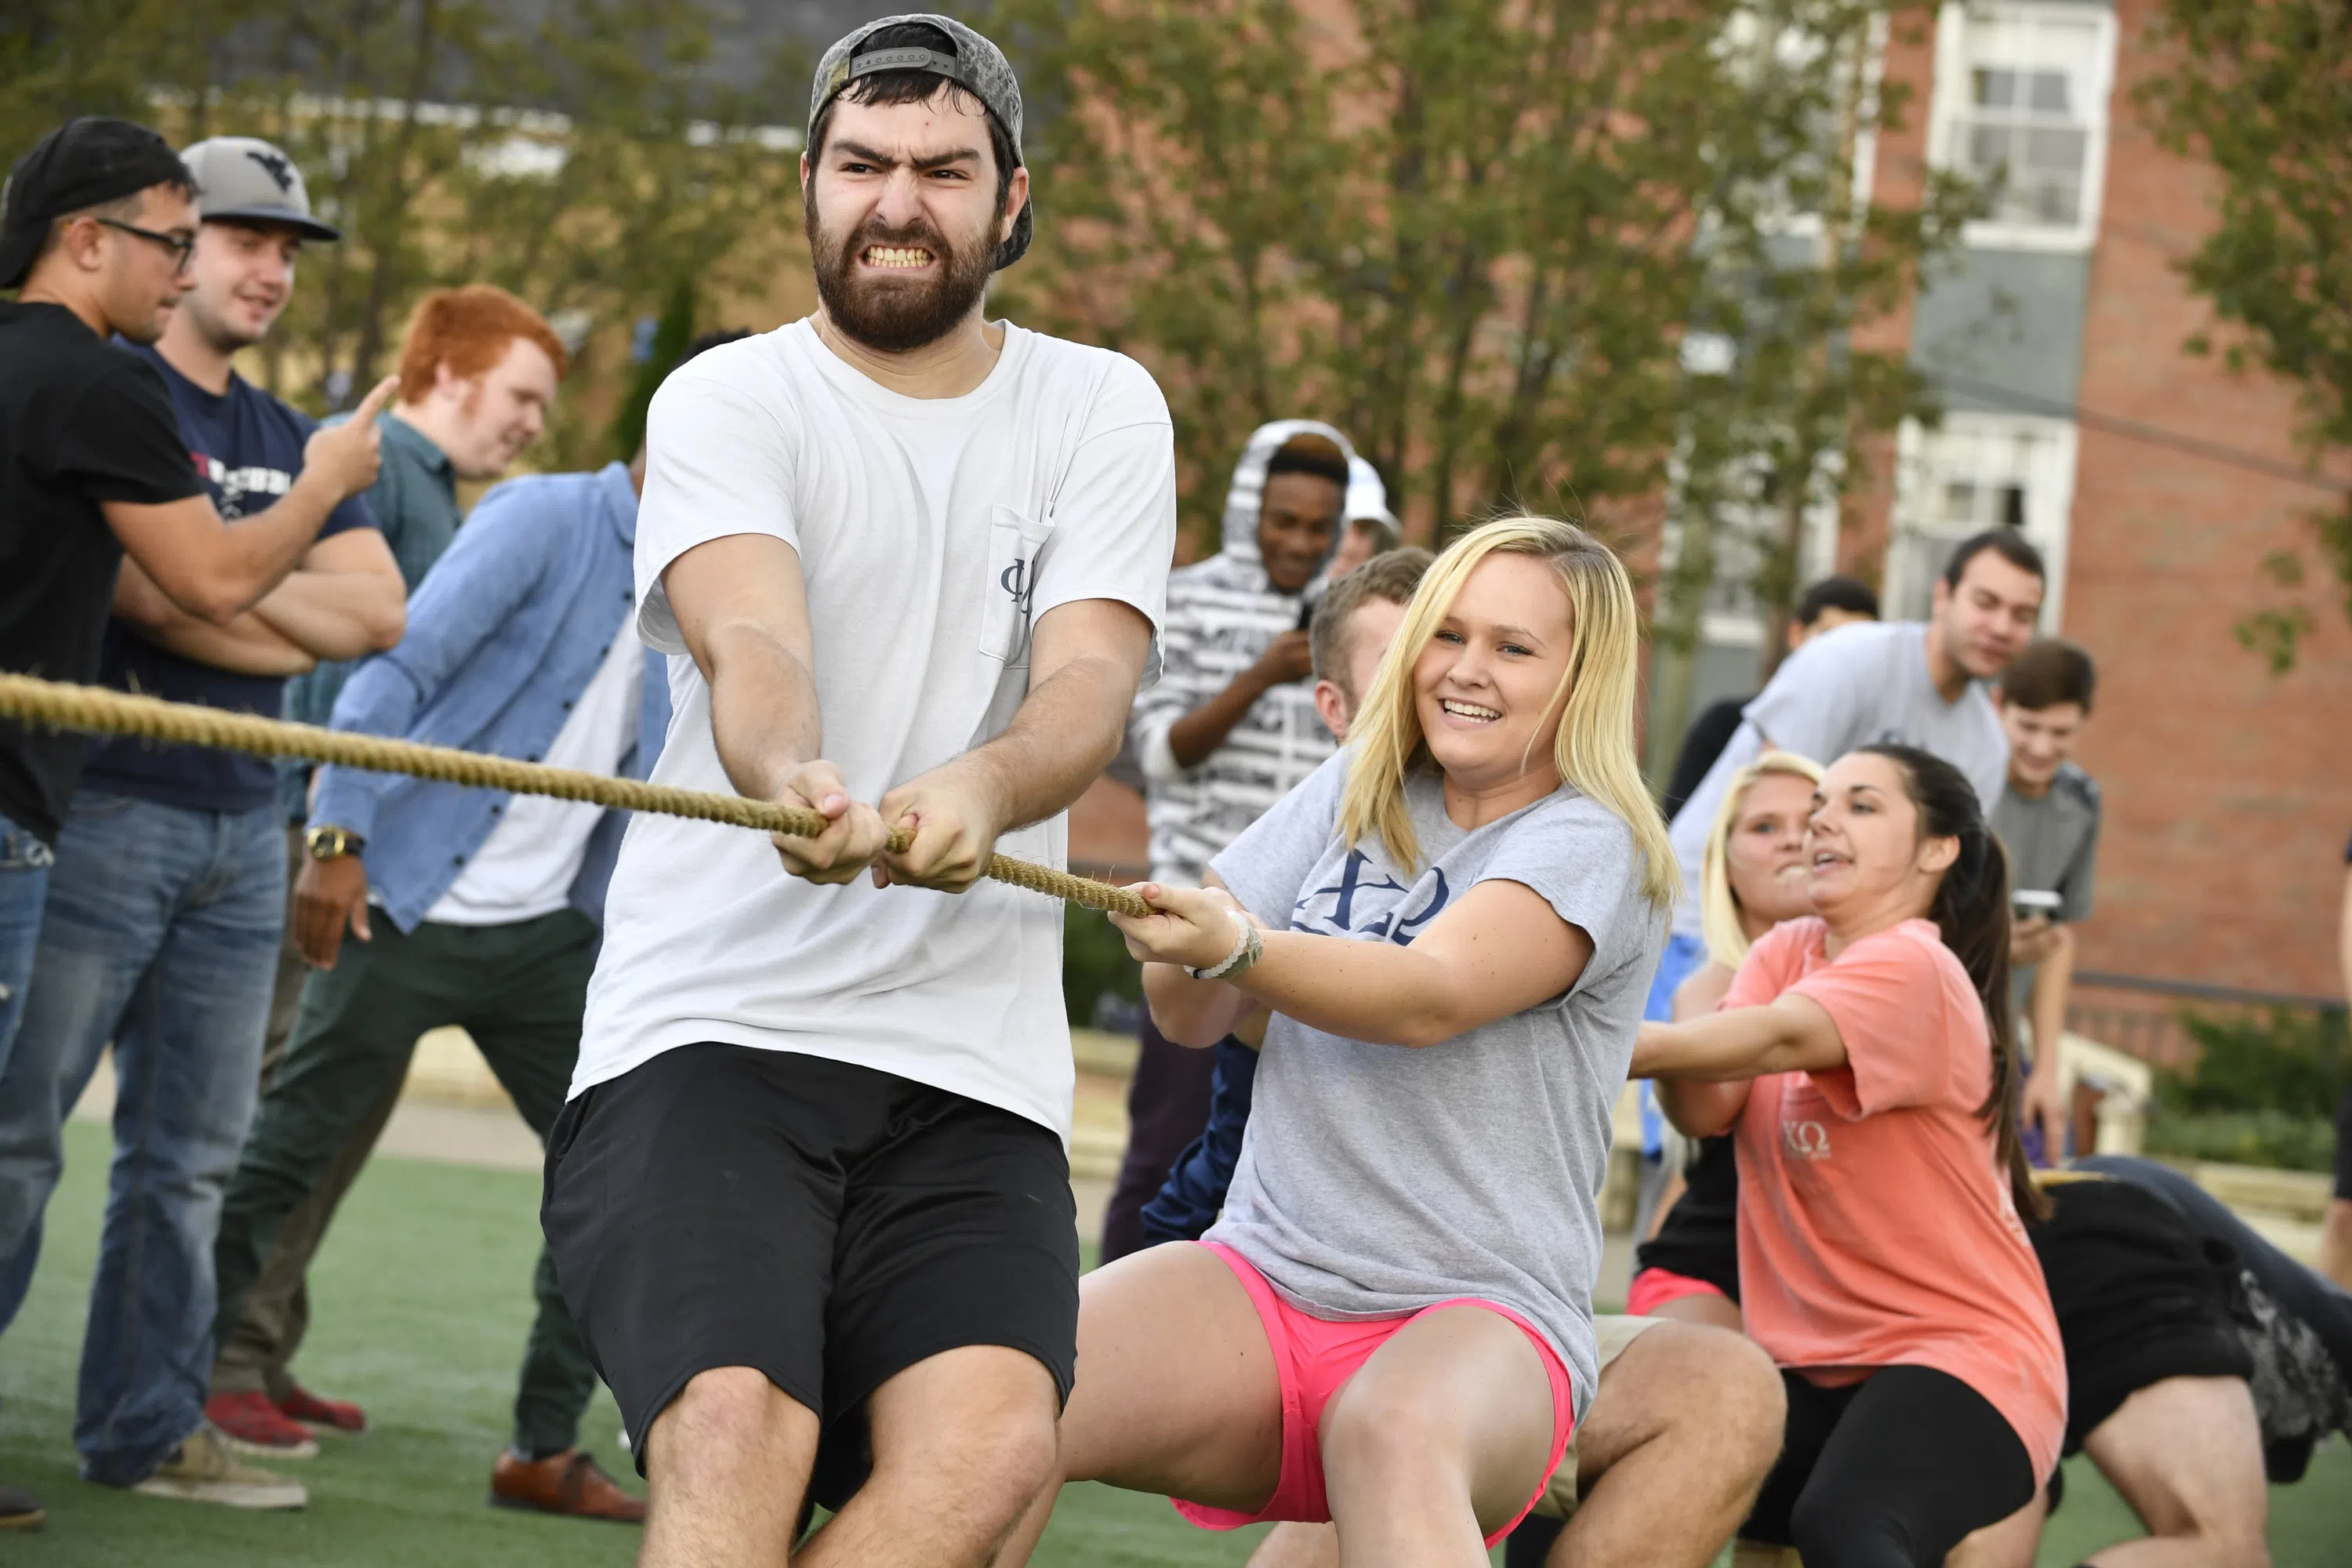 Fraternity and sorority members participate in tug of war.